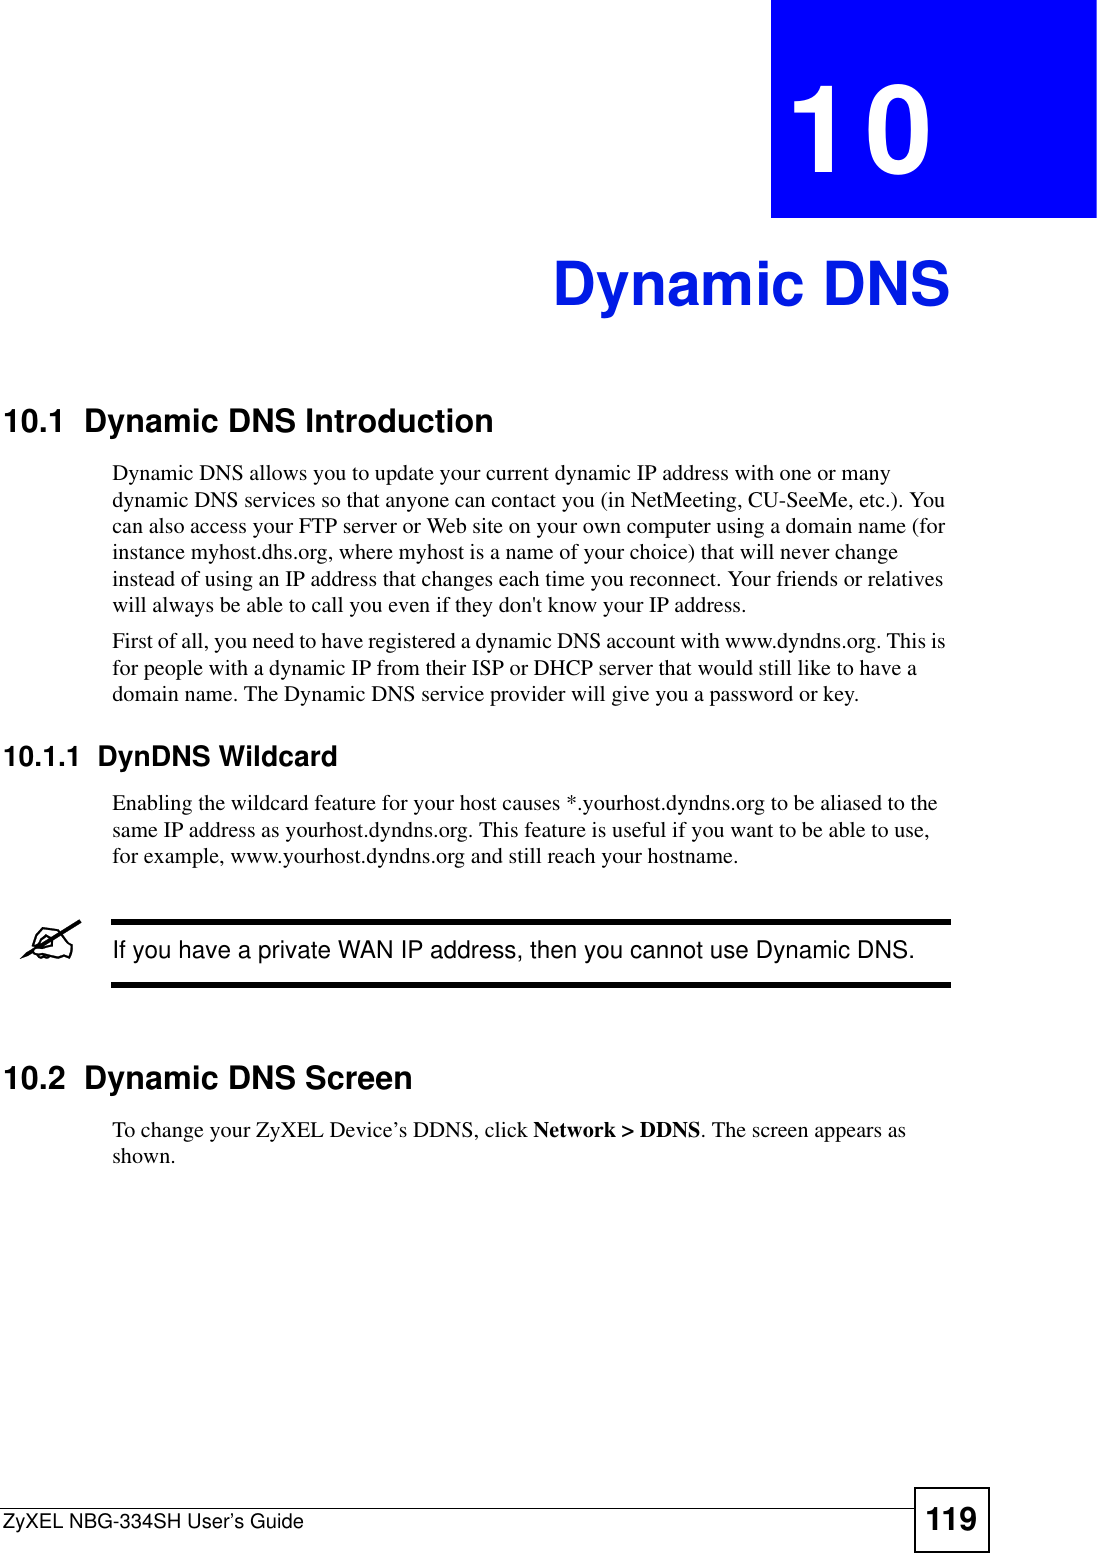 ZyXEL NBG-334SH User’s Guide 119CHAPTER 10Dynamic DNS10.1  Dynamic DNS Introduction Dynamic DNS allows you to update your current dynamic IP address with one or many dynamic DNS services so that anyone can contact you (in NetMeeting, CU-SeeMe, etc.). You can also access your FTP server or Web site on your own computer using a domain name (for instance myhost.dhs.org, where myhost is a name of your choice) that will never change instead of using an IP address that changes each time you reconnect. Your friends or relatives will always be able to call you even if they don&apos;t know your IP address.First of all, you need to have registered a dynamic DNS account with www.dyndns.org. This is for people with a dynamic IP from their ISP or DHCP server that would still like to have a domain name. The Dynamic DNS service provider will give you a password or key.10.1.1  DynDNS WildcardEnabling the wildcard feature for your host causes *.yourhost.dyndns.org to be aliased to the same IP address as yourhost.dyndns.org. This feature is useful if you want to be able to use, for example, www.yourhost.dyndns.org and still reach your hostname.&quot;If you have a private WAN IP address, then you cannot use Dynamic DNS.10.2  Dynamic DNS ScreenTo change your ZyXEL Device’s DDNS, click Network &gt; DDNS. The screen appears as shown.